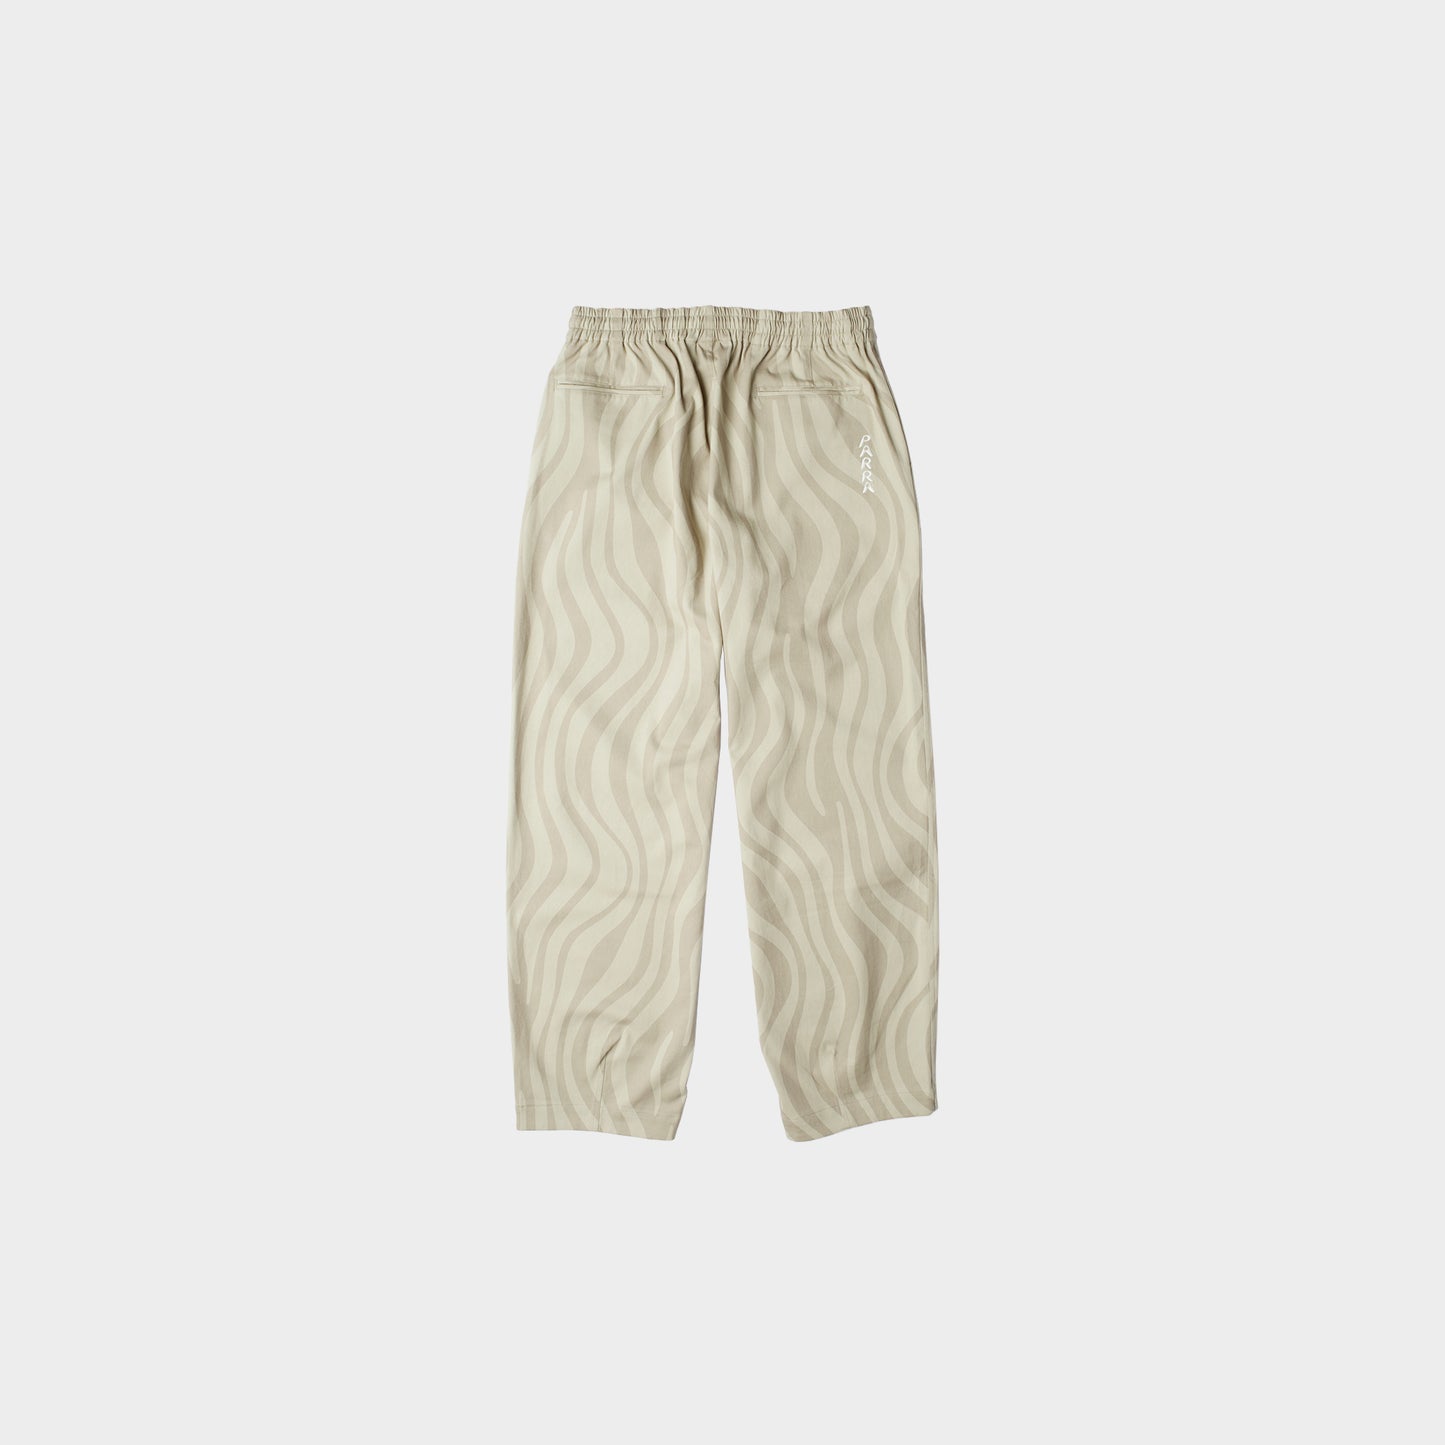 Parra Flowing Stripes Pants in Farbe tan